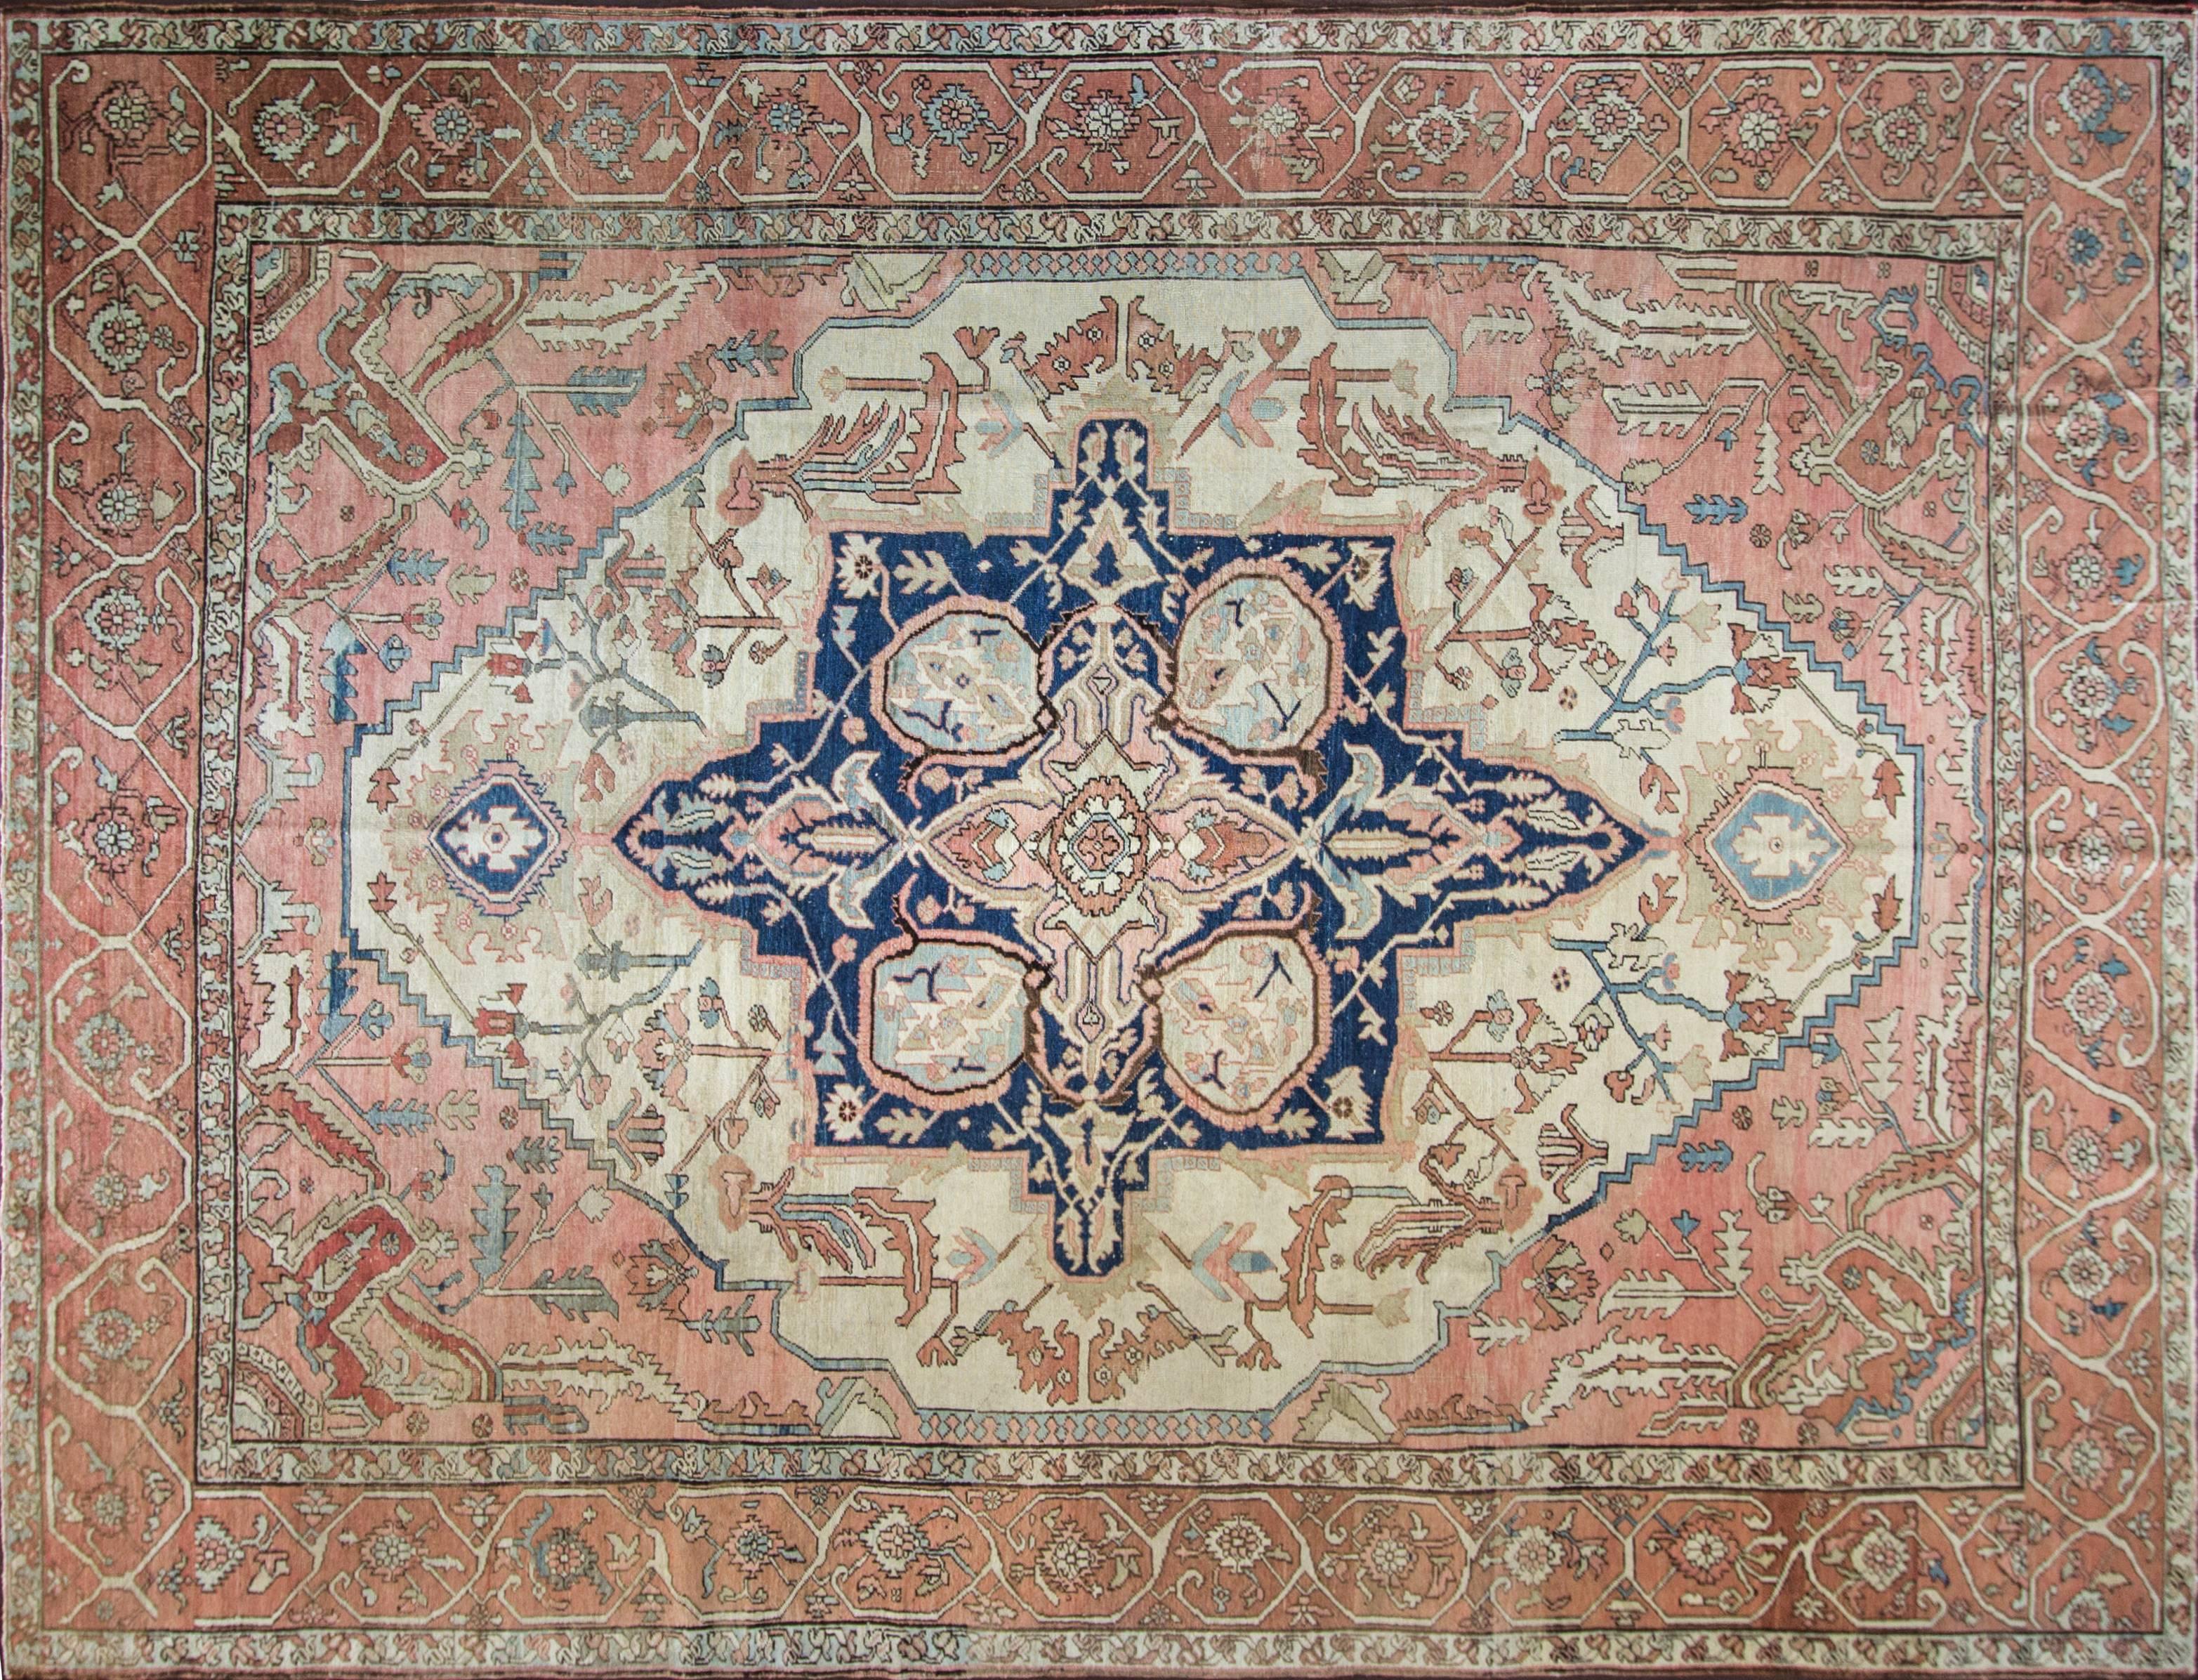 Fine 19th-century antique Serapi carpet of Persia. Woven in the rugged mountains of Northwest Persia, Serapi rugs are a distinct Heriz region style, with finer knotting and more large-scale spaciously placed antique carpet designs than other rugs